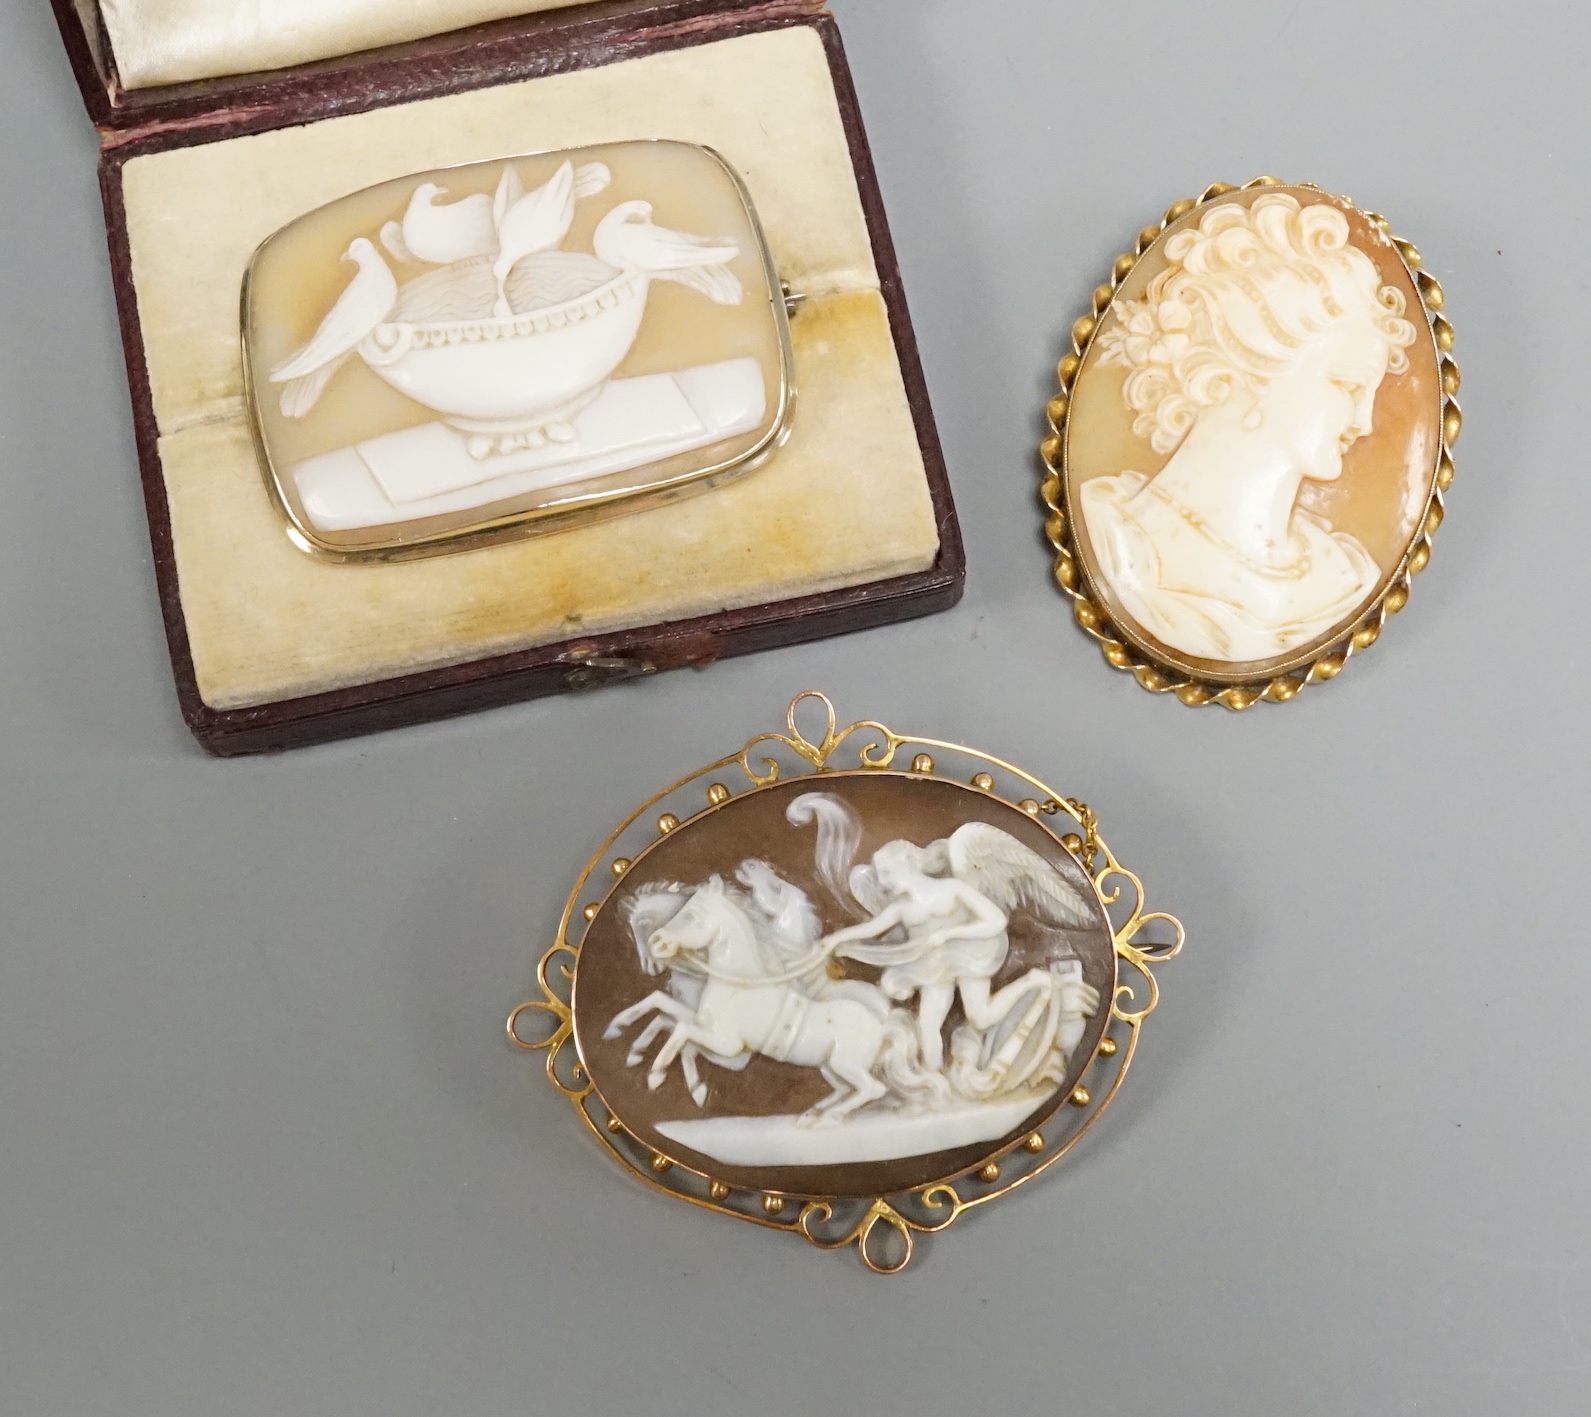 An early 20th century 9ct mounted oval cameo shell brooch, 57mm and two other cameo shell brooches including maiden and pliny doves.